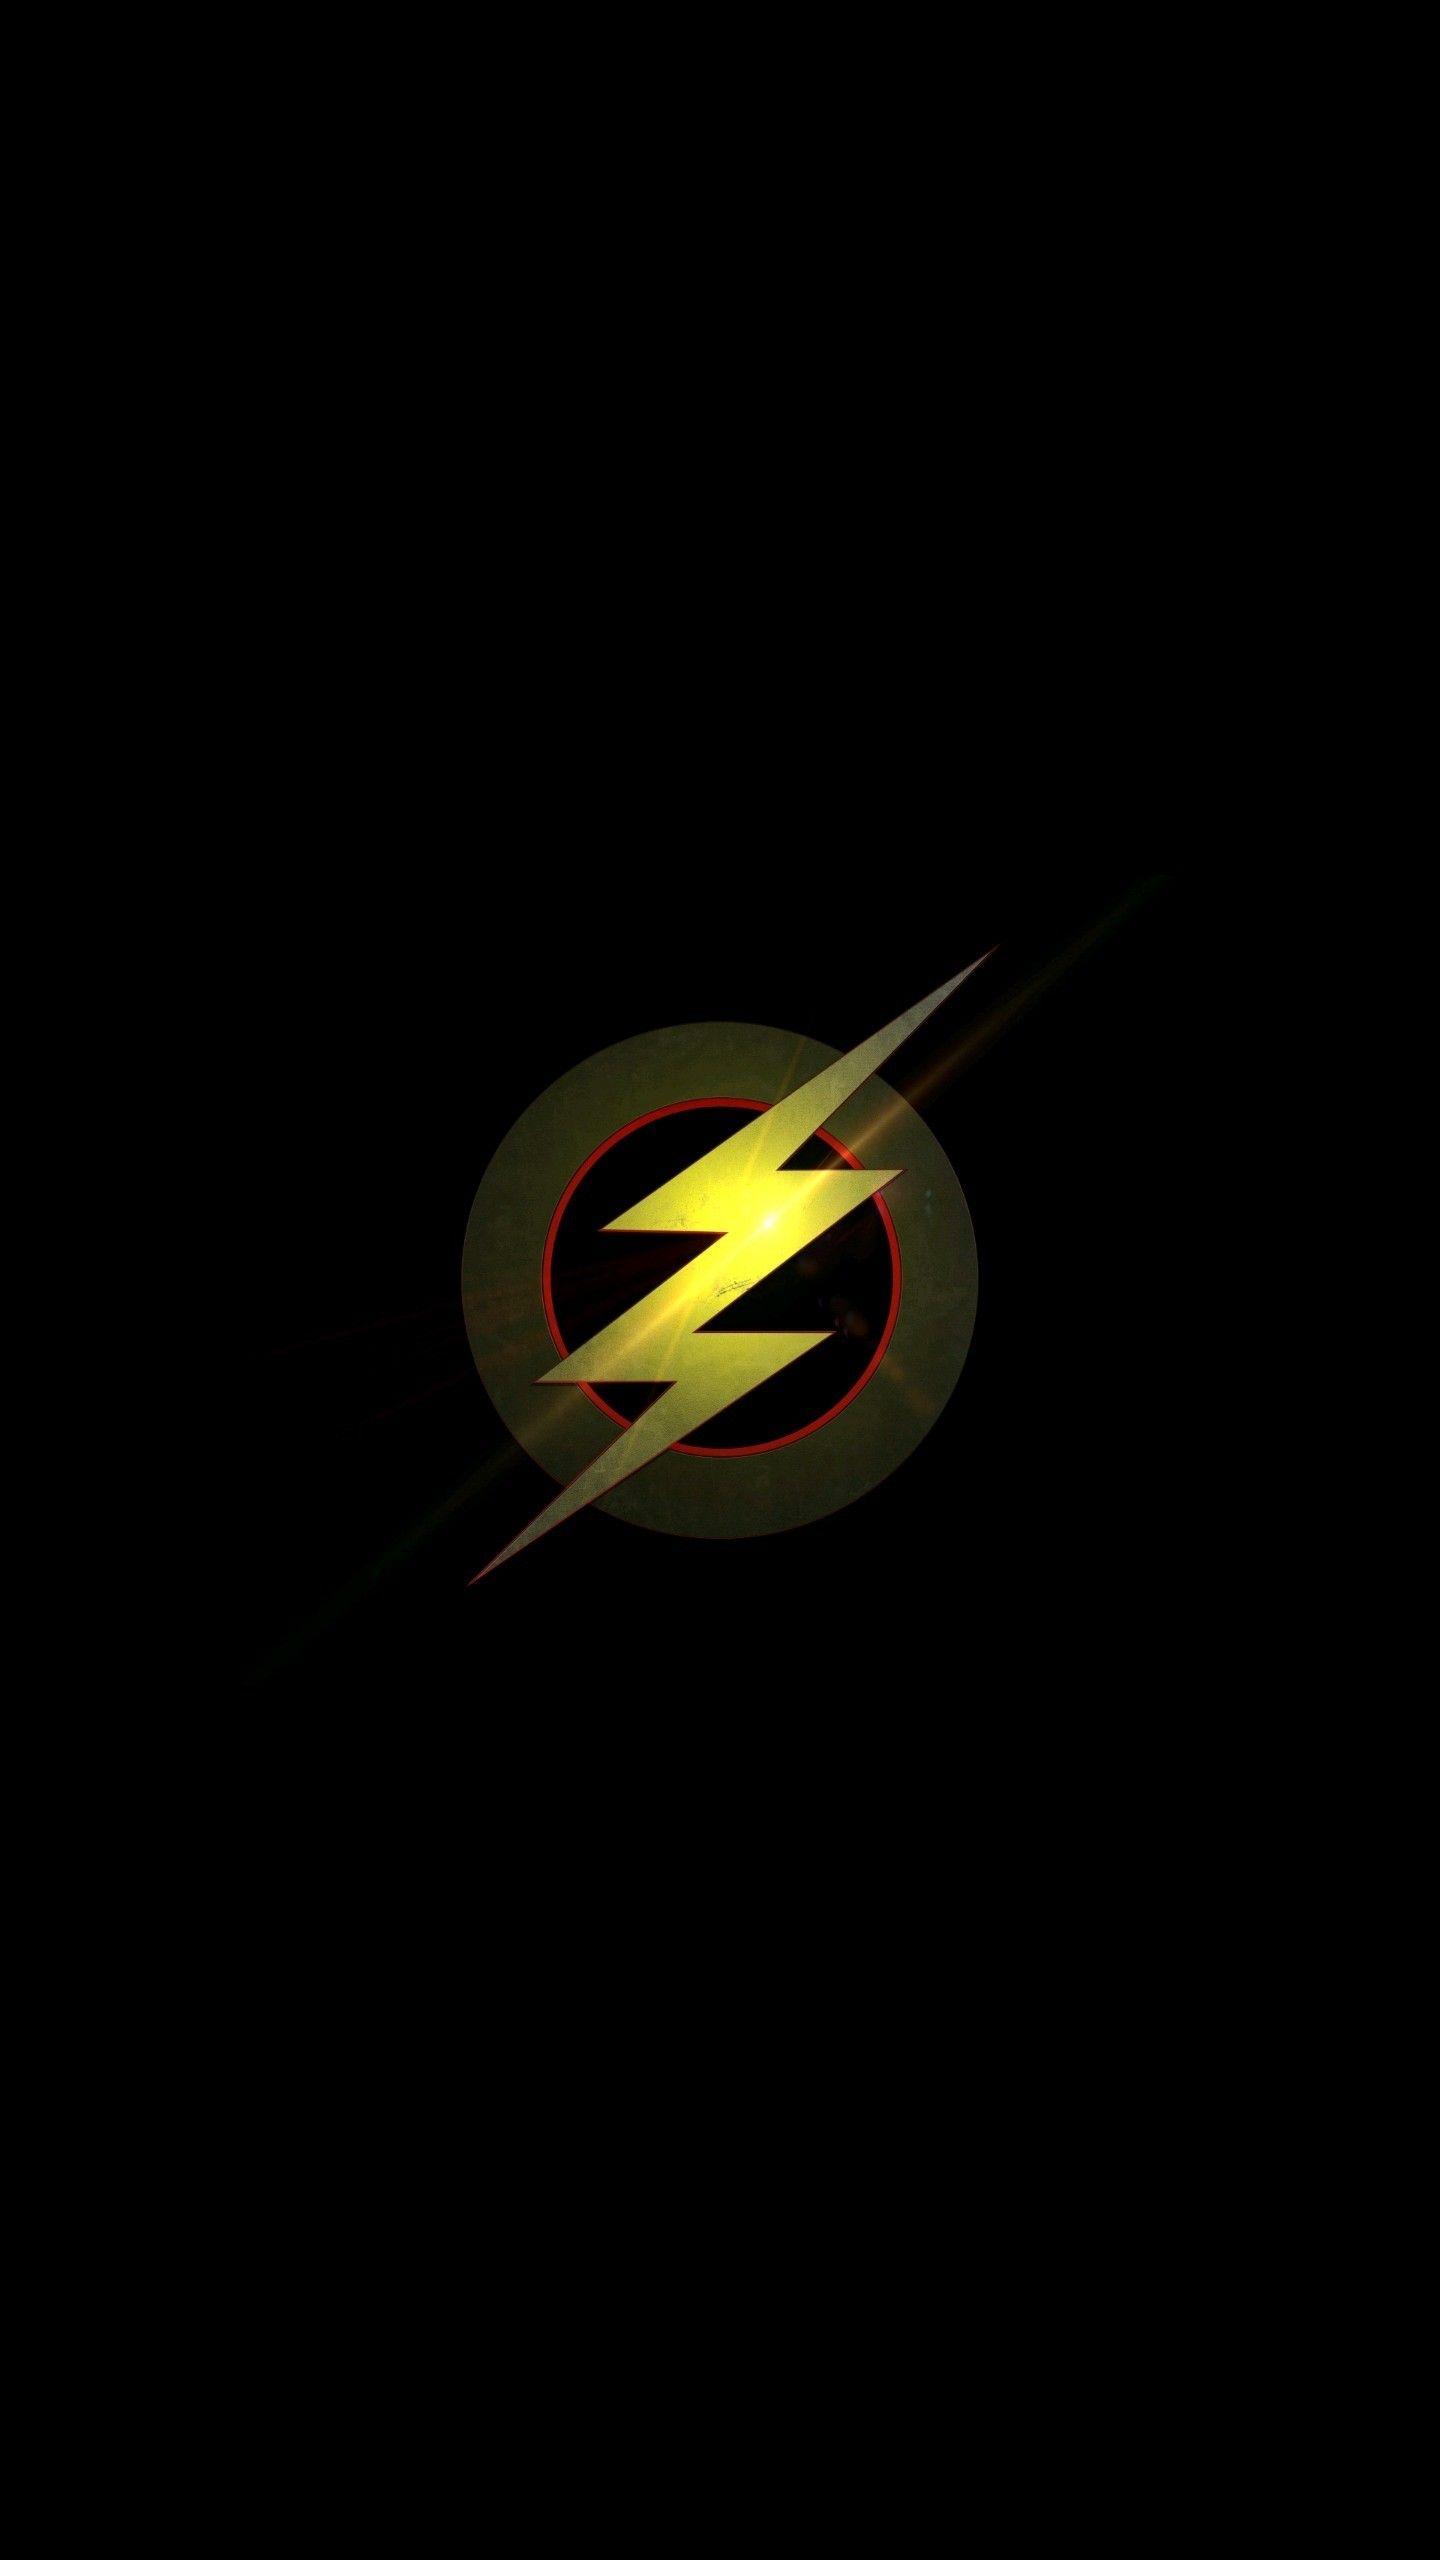 The Flash 33. Flash wallpaper, Cool wallpaper for phones